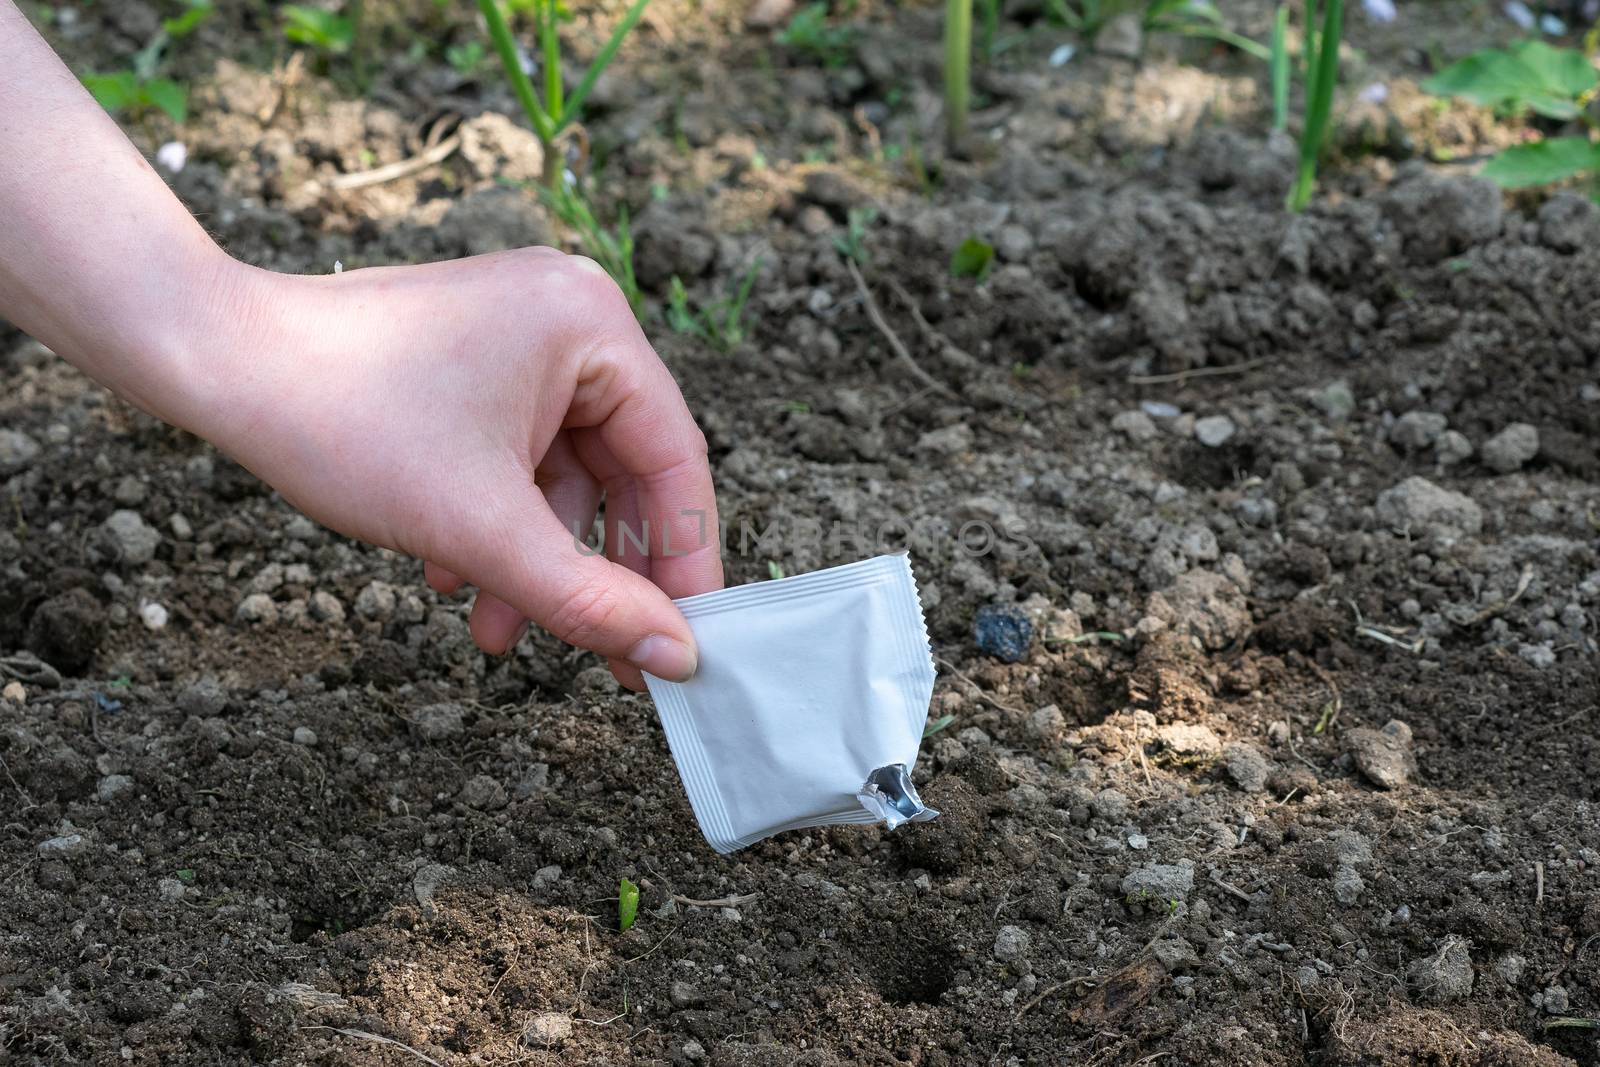 Hands sowing seeds into the soil in the vegetable garden. Spring by xtrekx